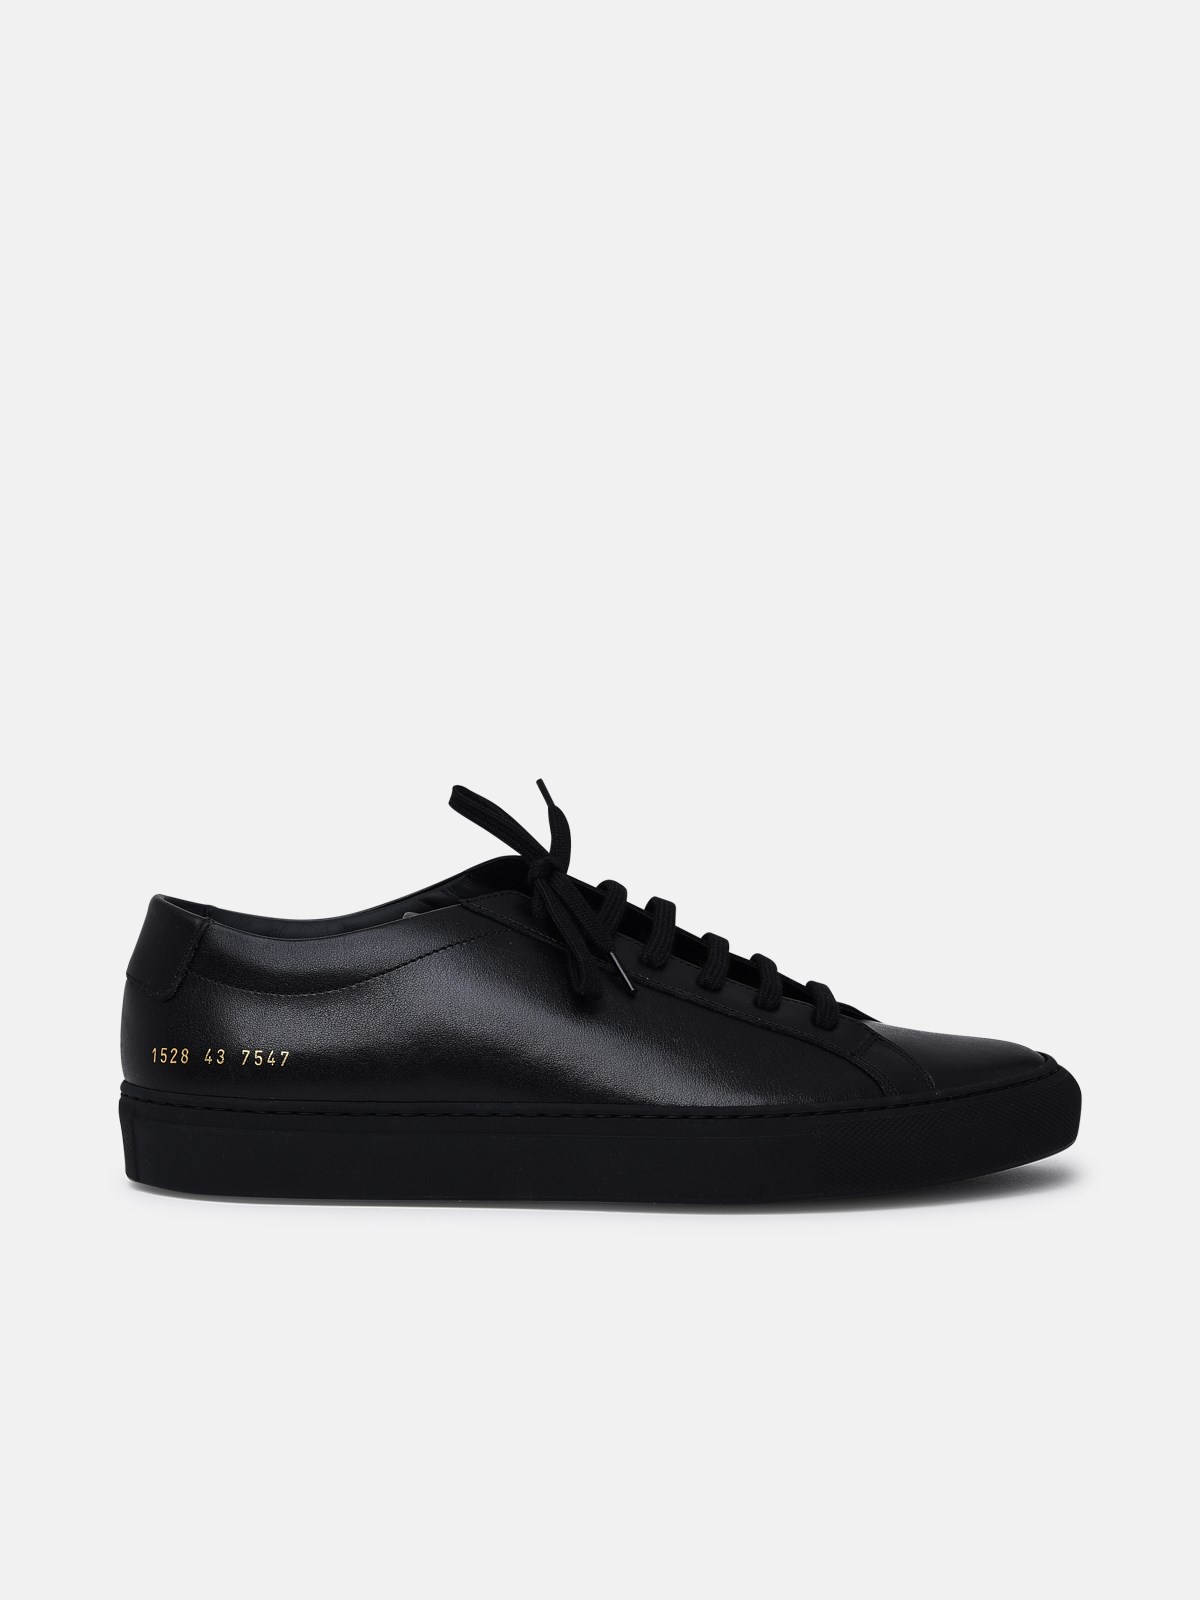 COMMON PROJECTS BLACK LEATHER ACHILLES trainers